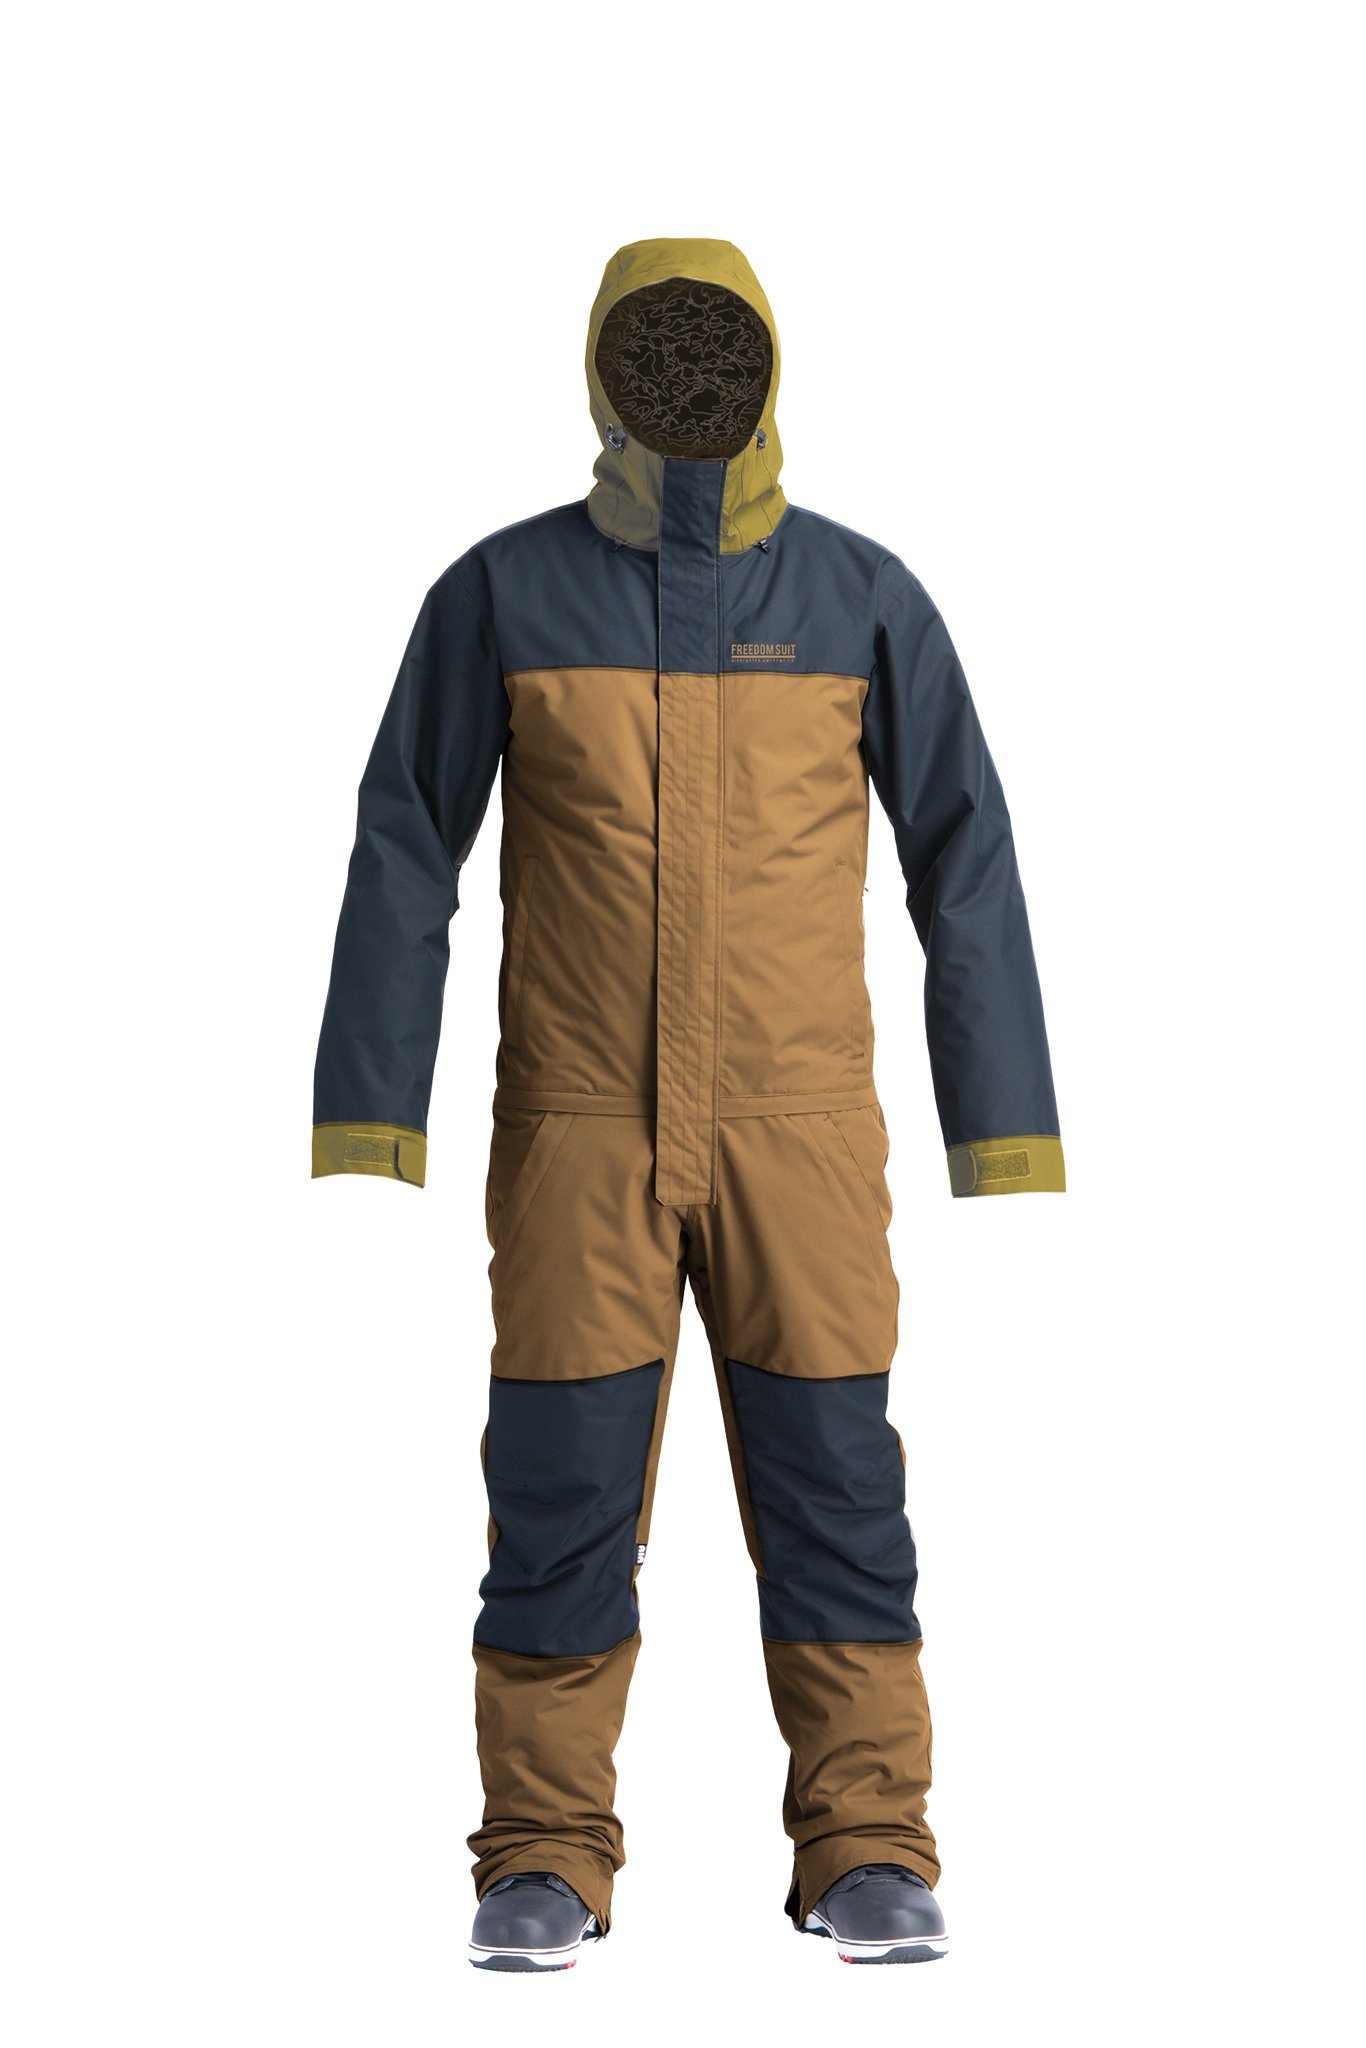 Airblaster Stretch Freedom Suit grizzly